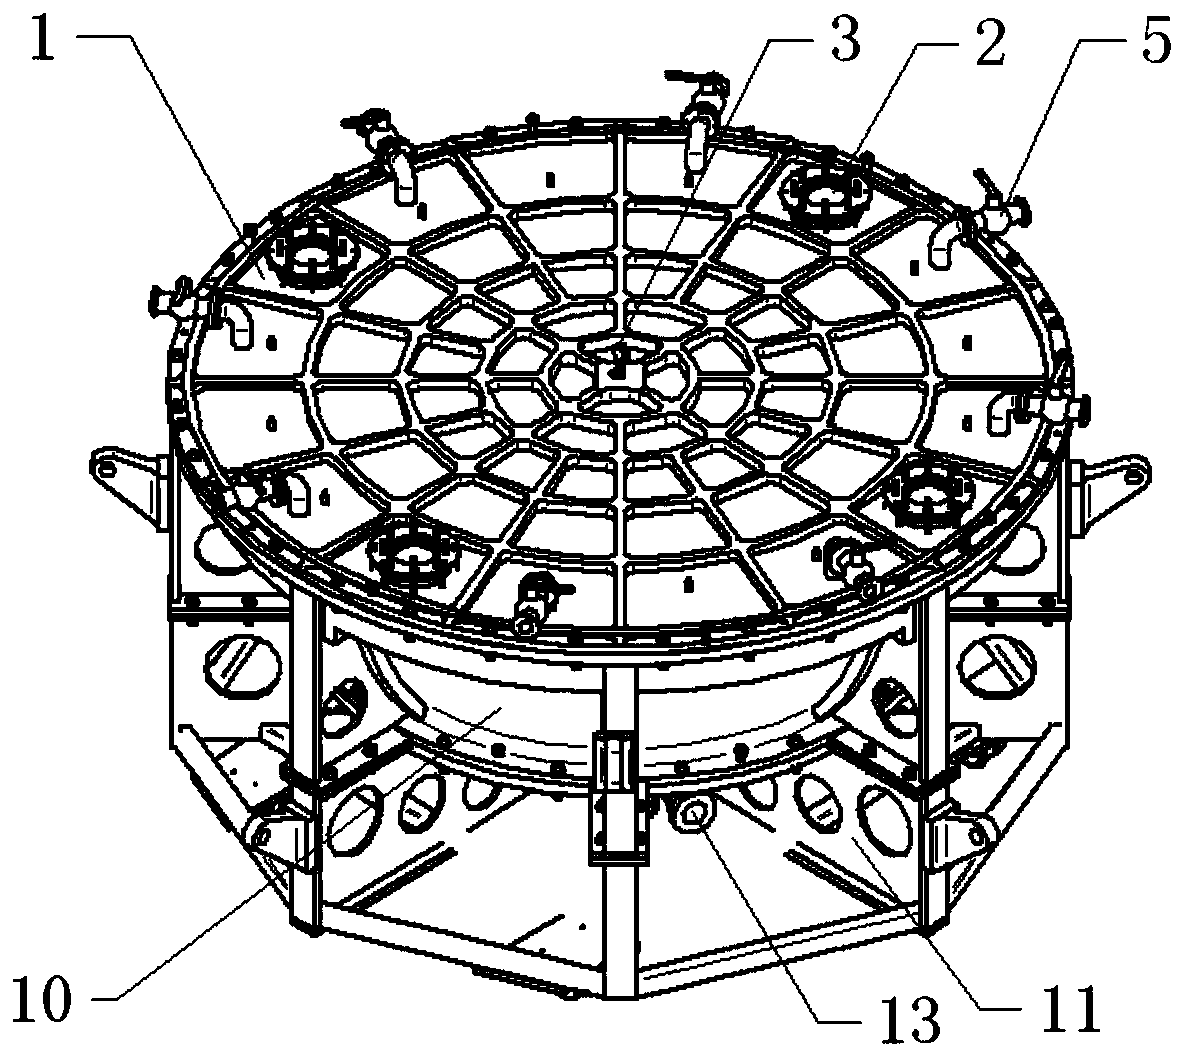 Hood heat shield forming tool for returnable spacecraft